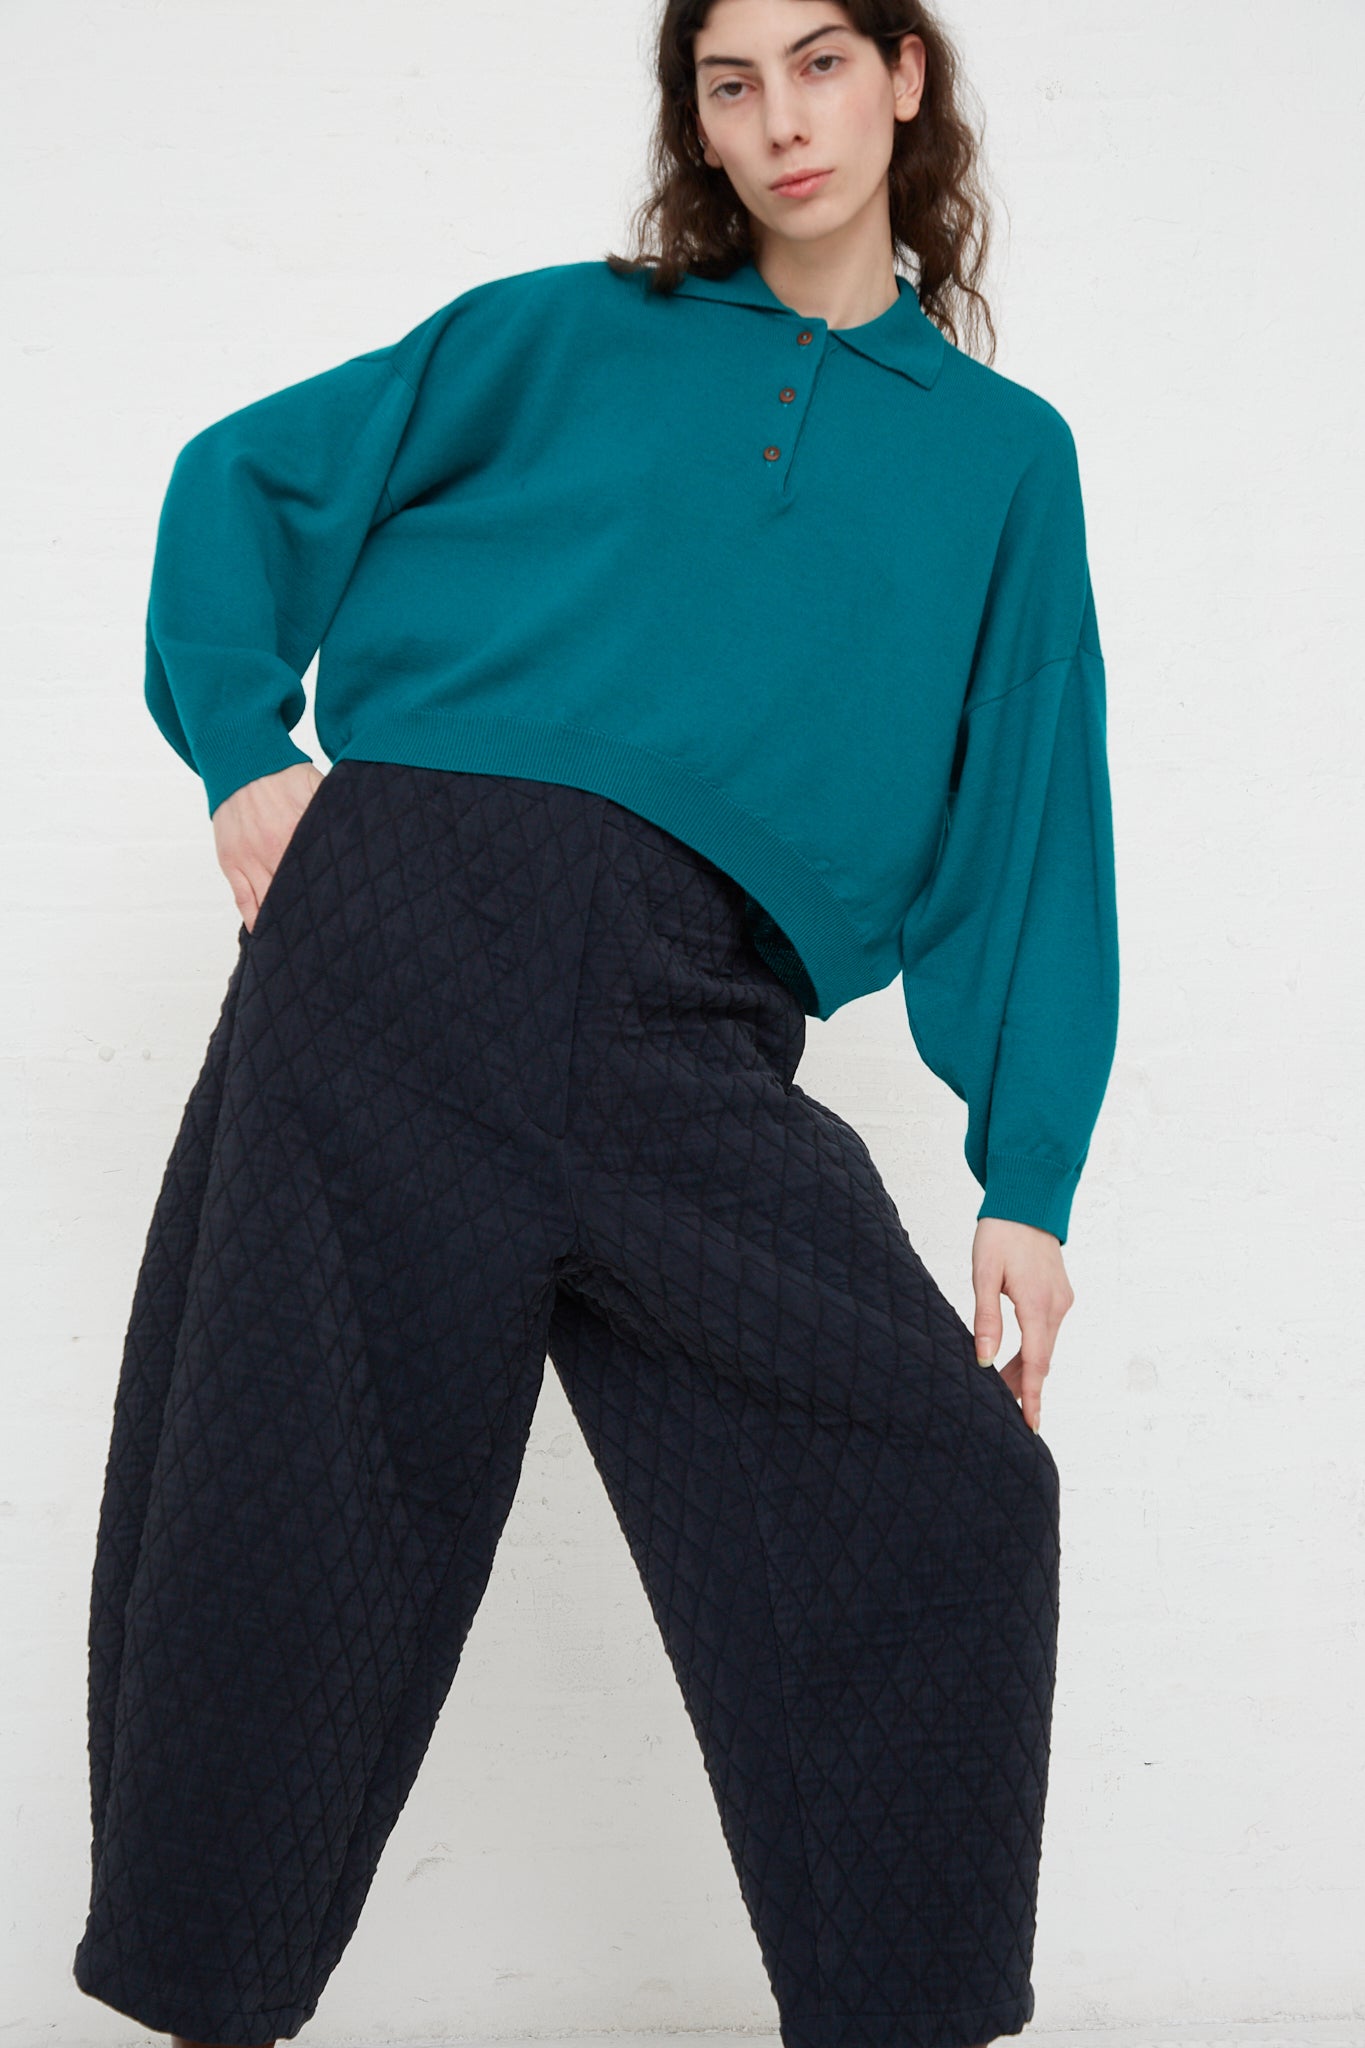 The model is wearing a teal sweater and Cordera's Quilted Curved Pant in Black with an elasticated waist.